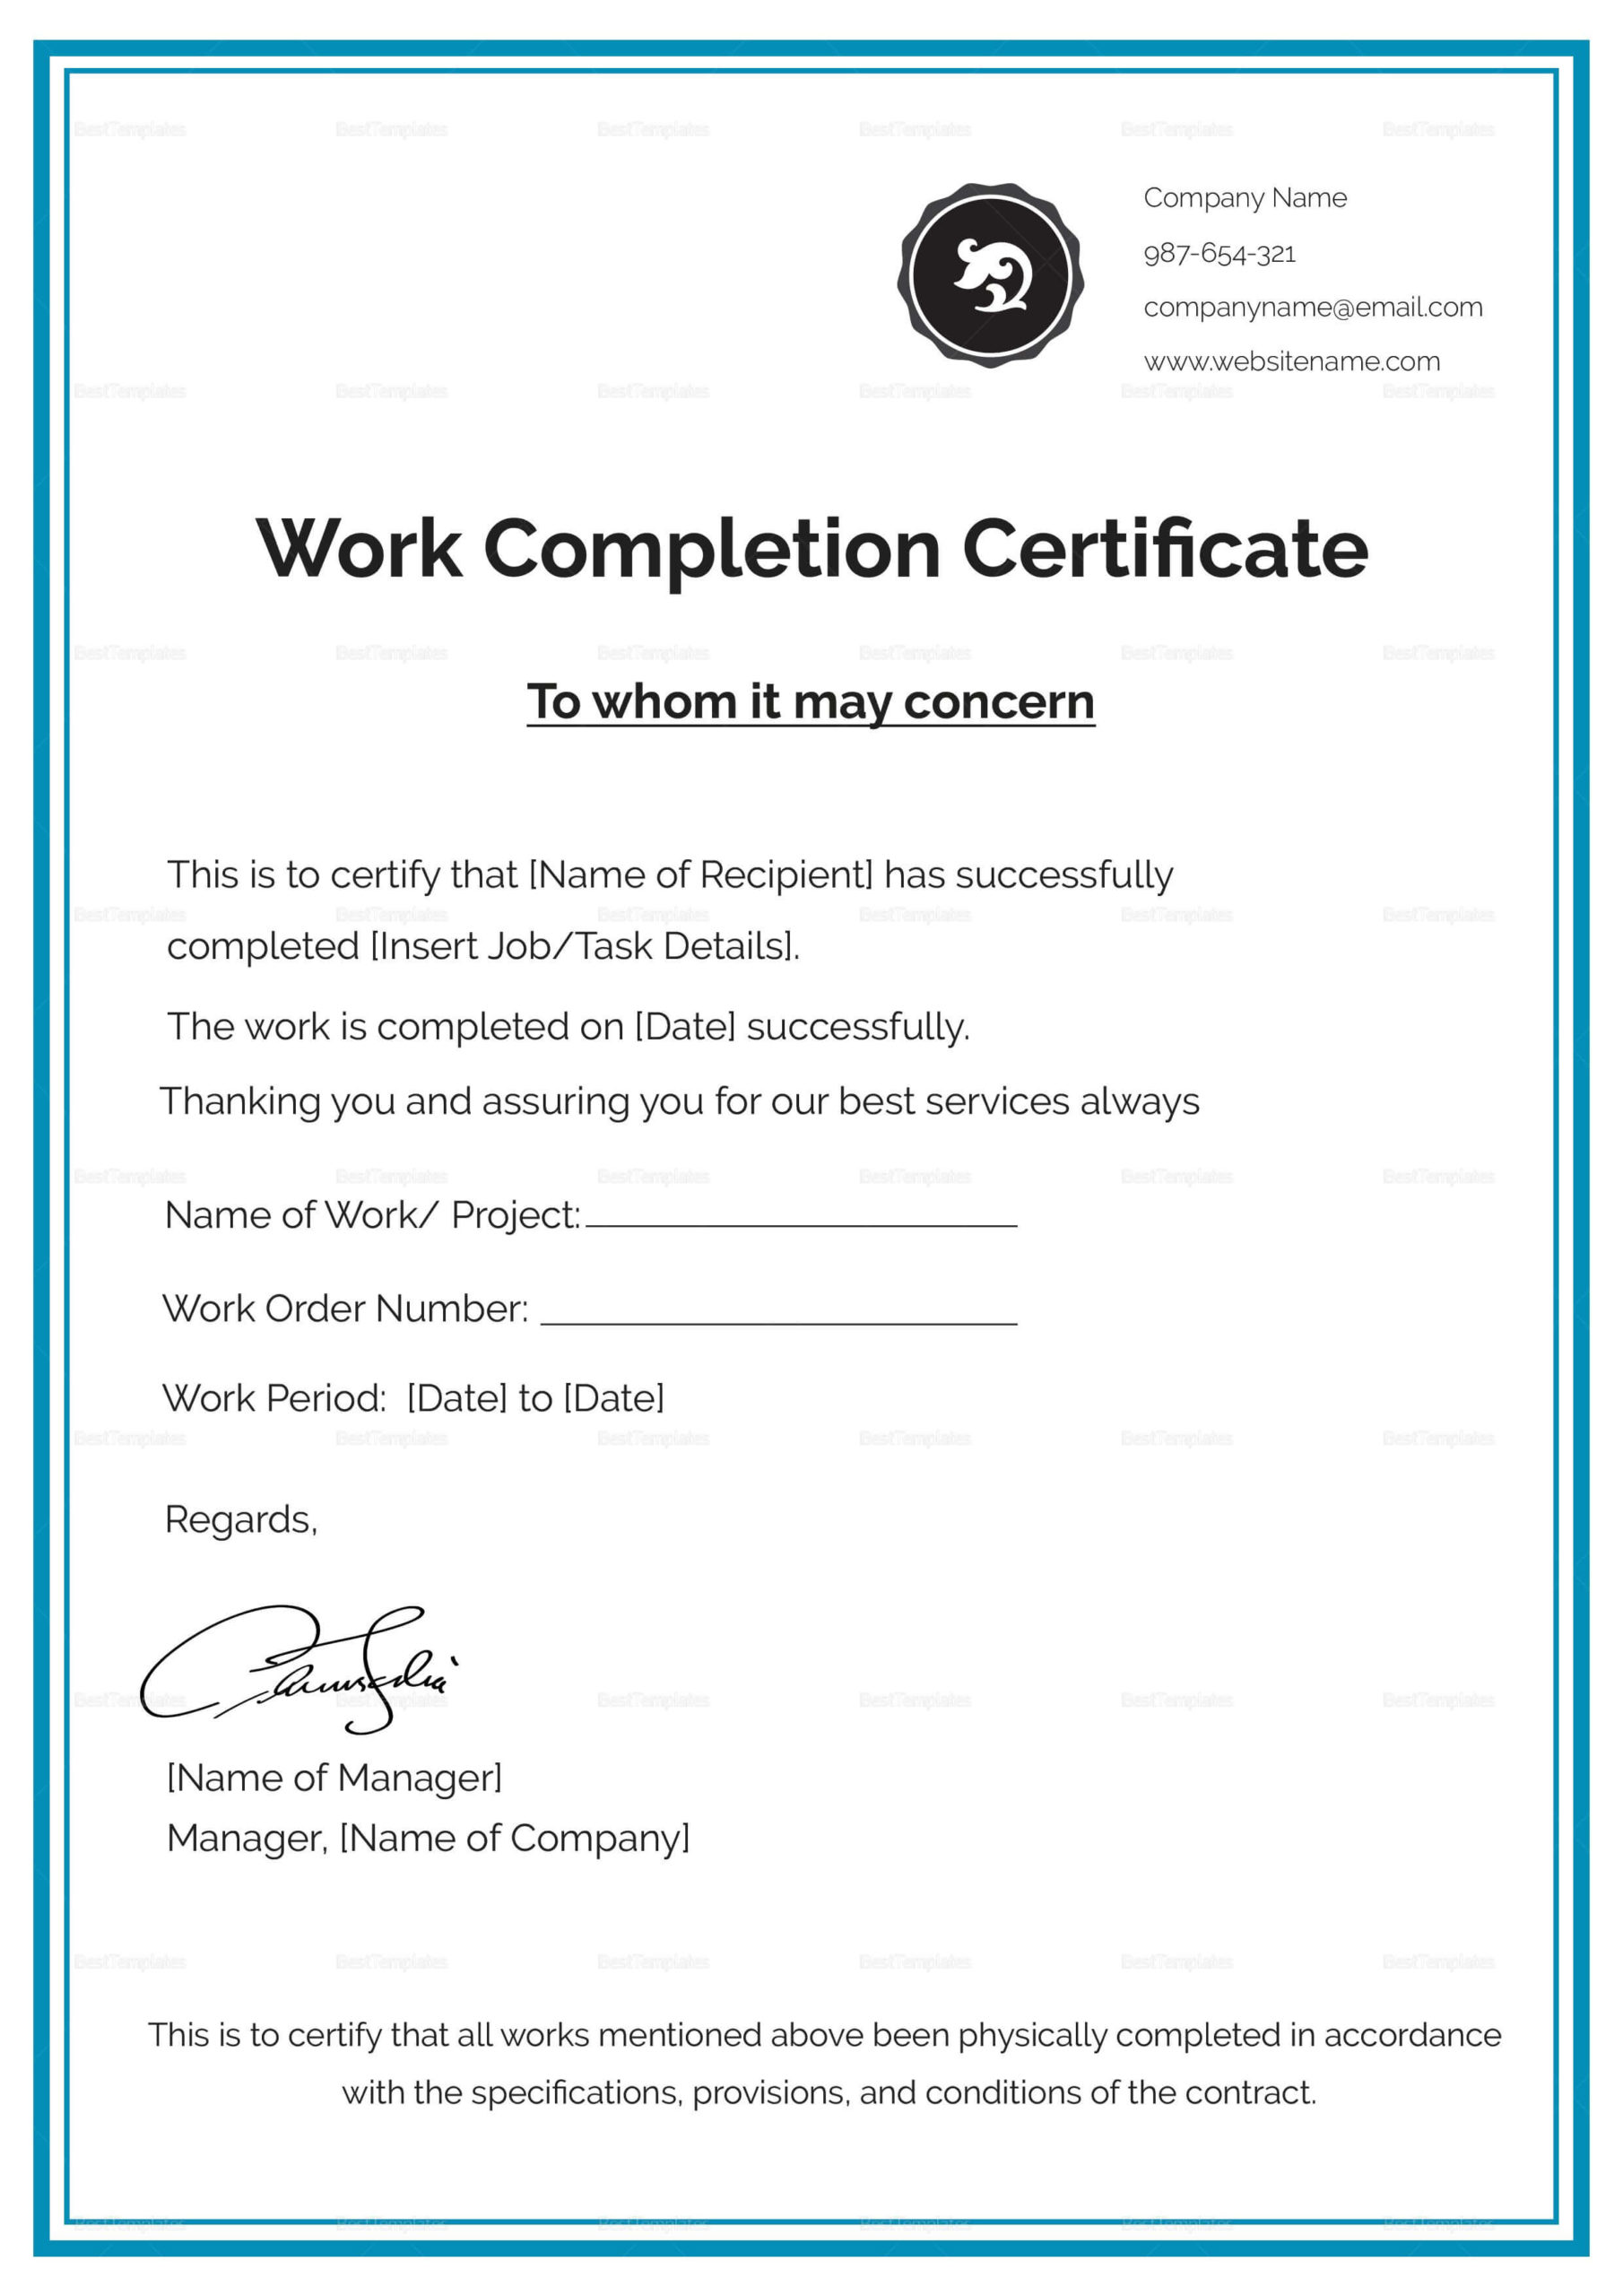 Jct Practical Completion Certificate Template inside Professional Certificate Of Construction Completion Template